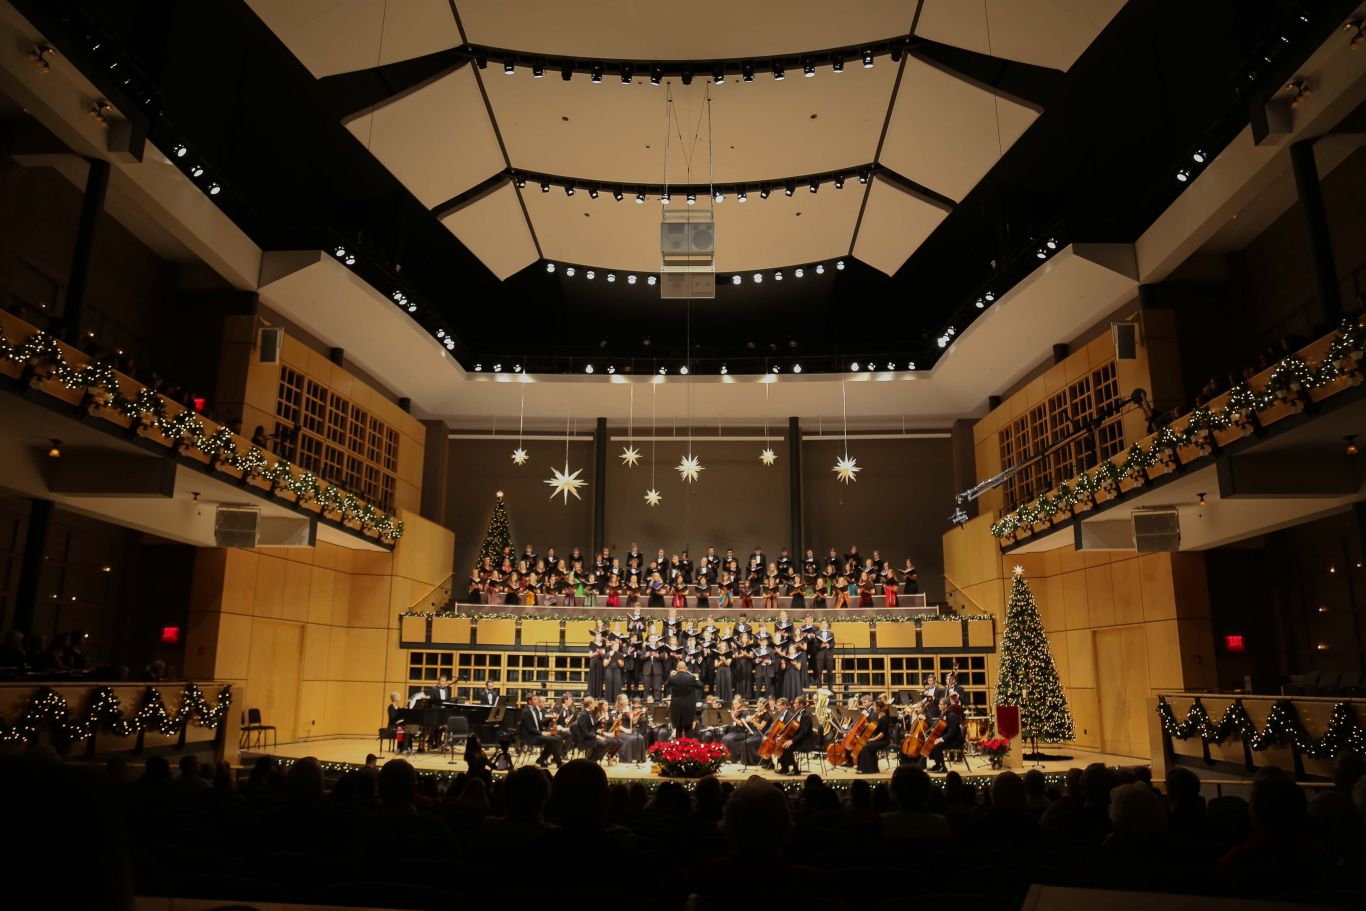 Choir performance in Sauder Concert Hall with Christmas decorations